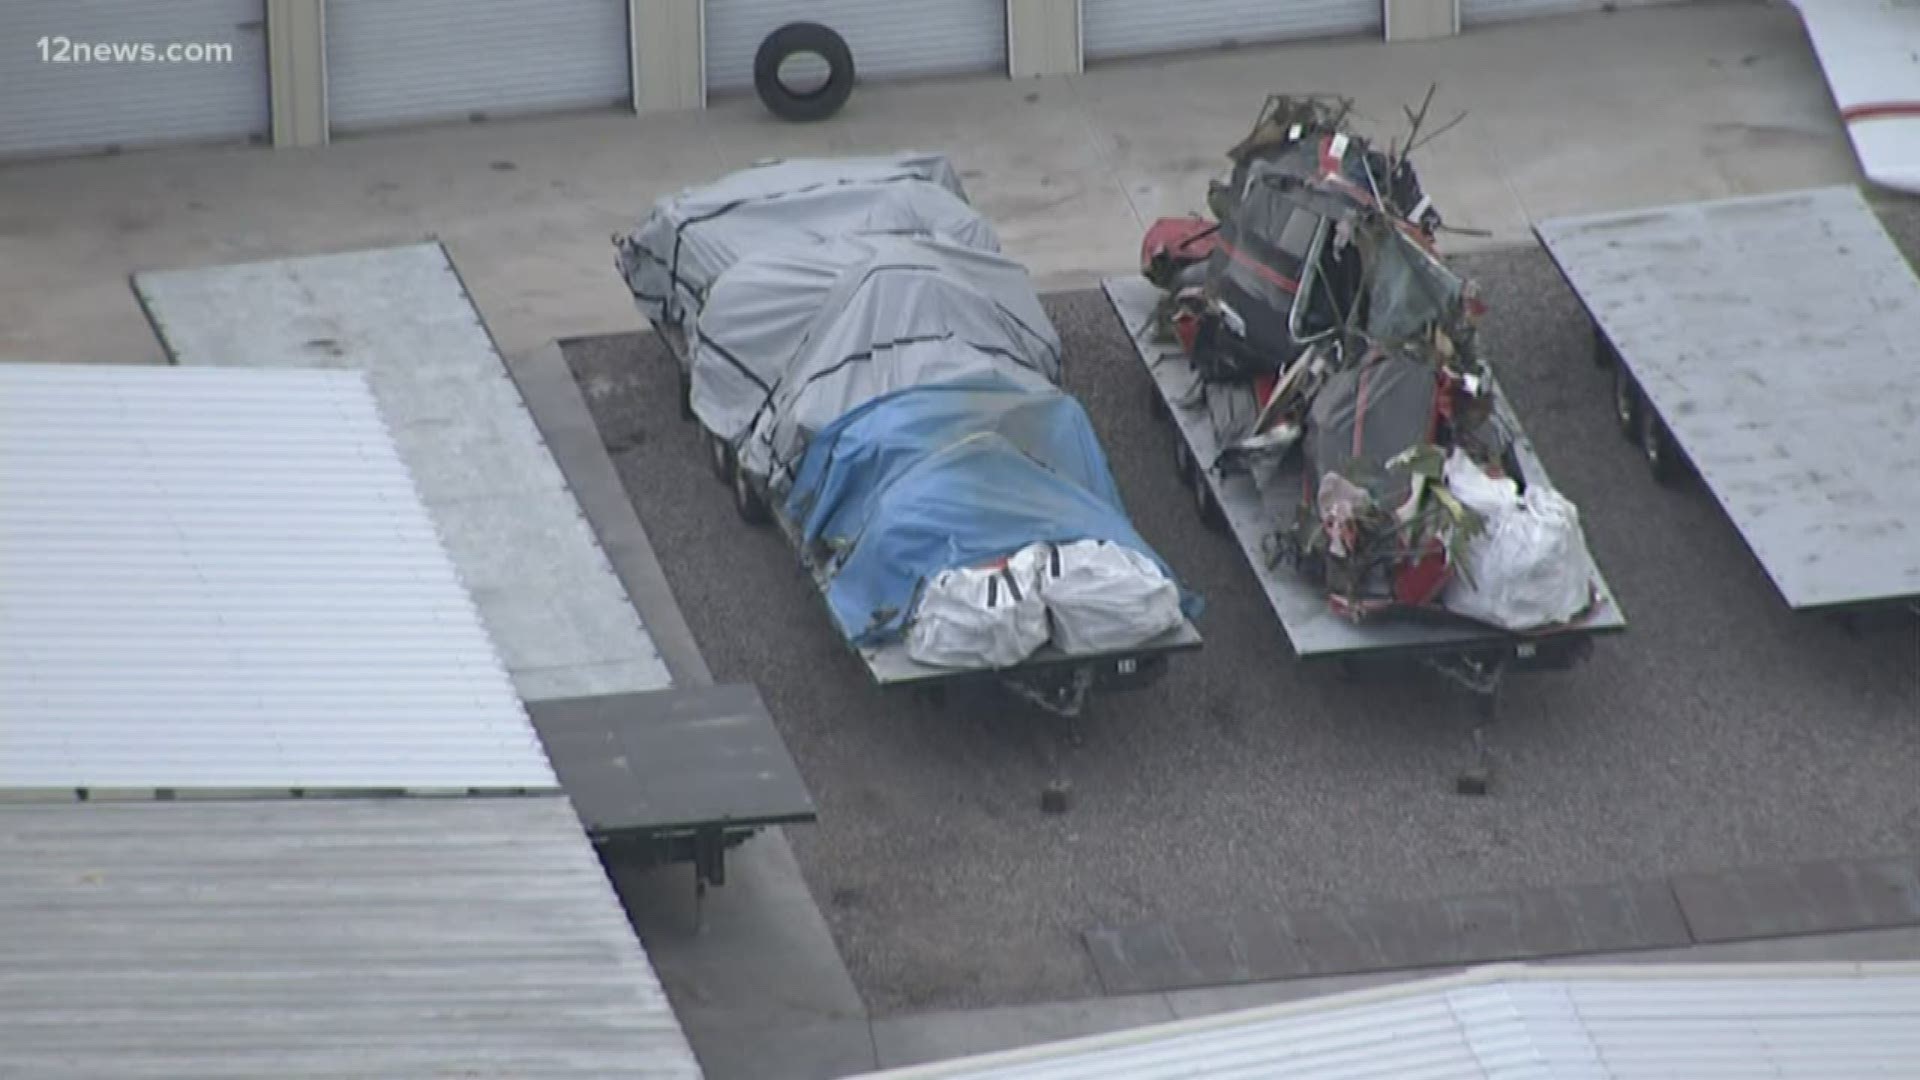 Wreckage from helicopter crash that killed Kobe Bryant taken to Phoenix